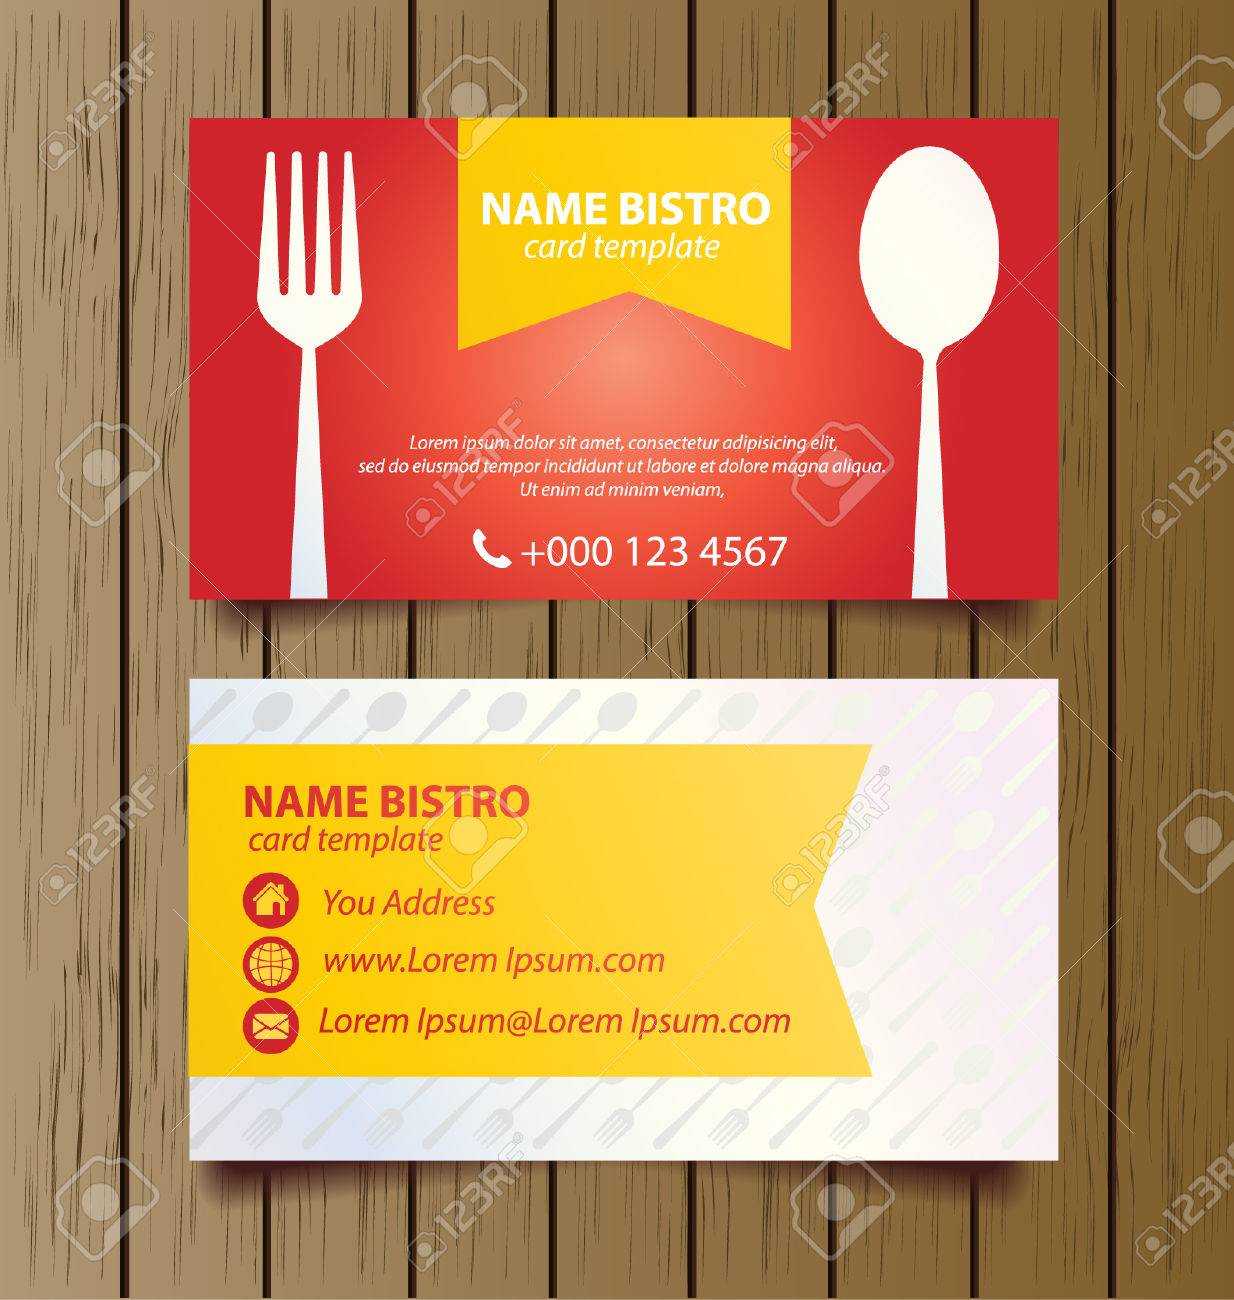 Business Card Template For Restaurant Business Vector Regarding Restaurant Business Cards Templates Free